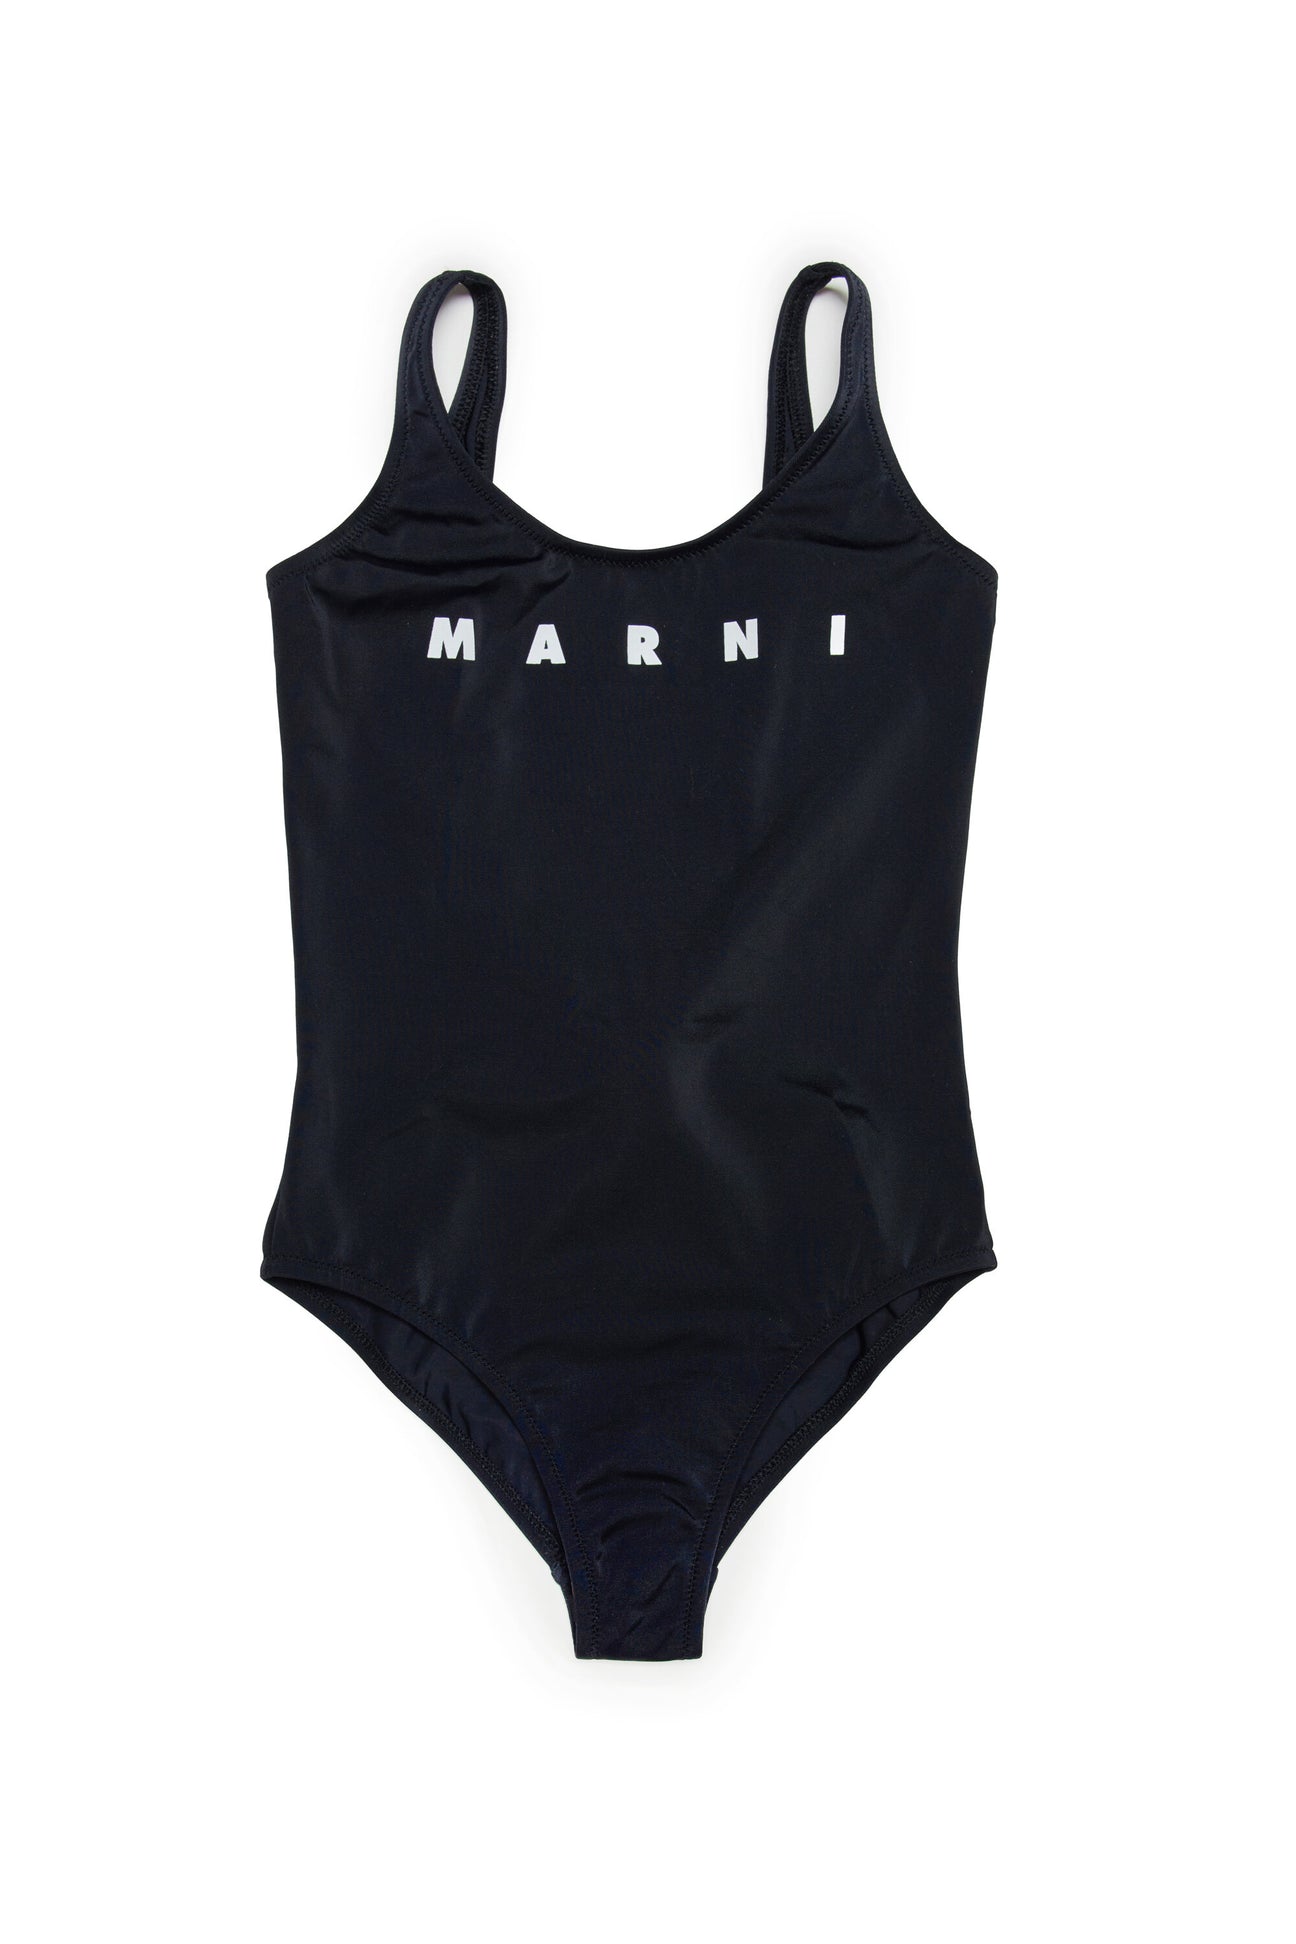 Black one-piece swimming costume in lycra with logo 